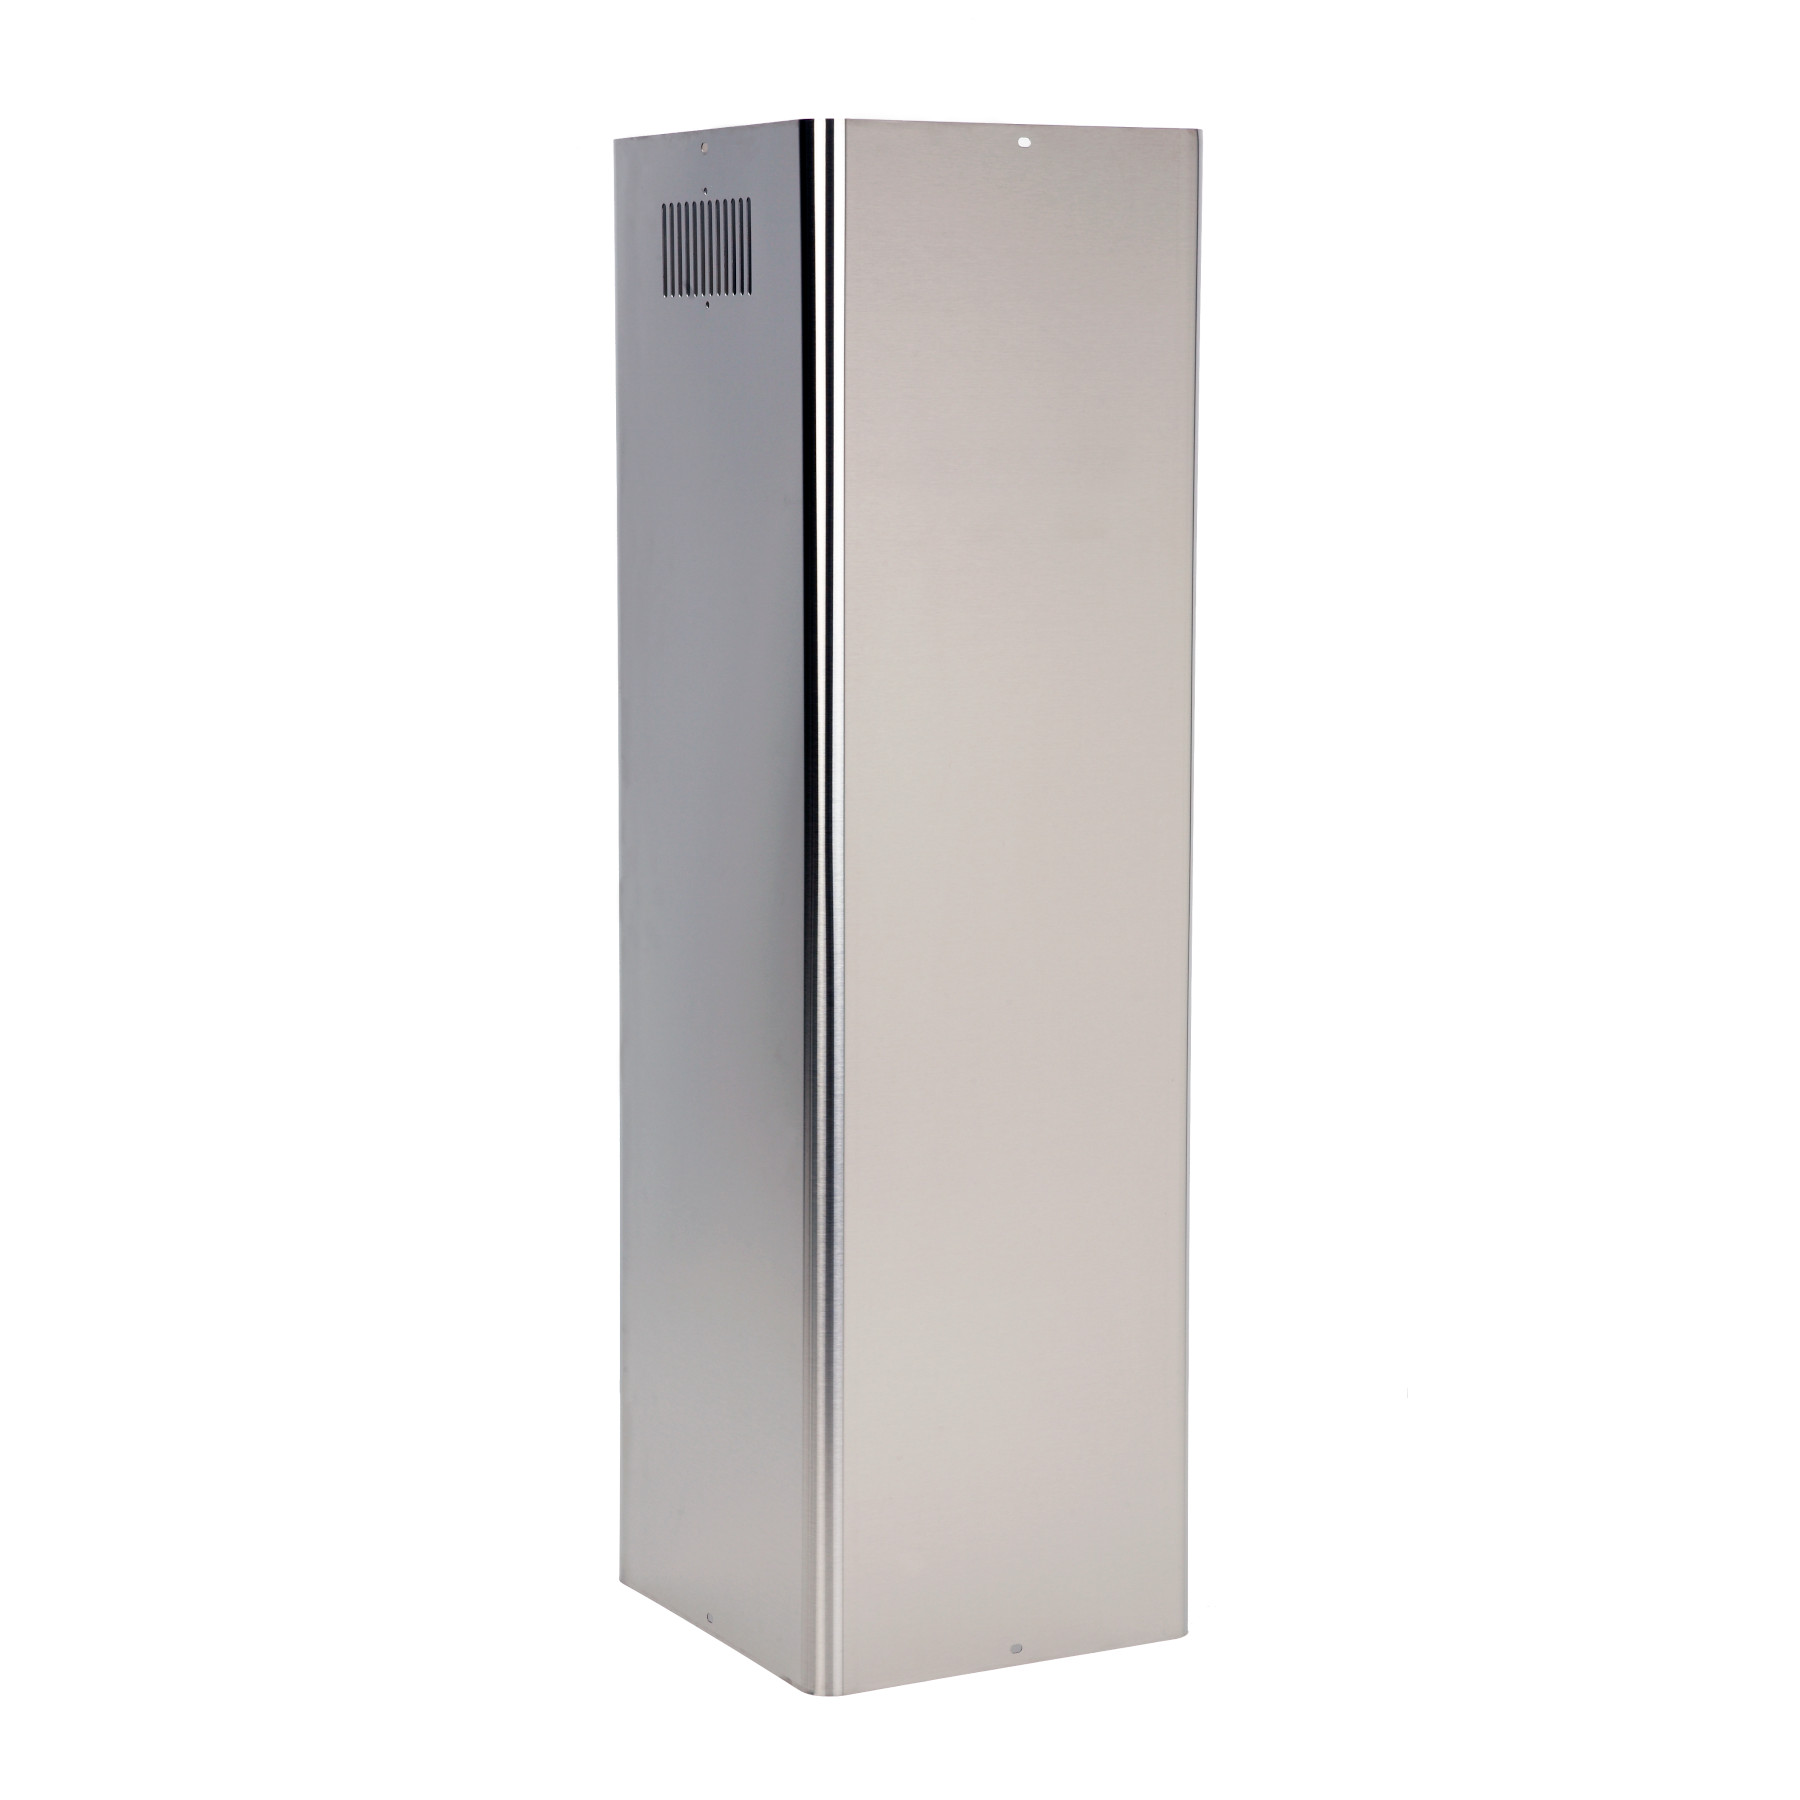 Optional Non-Ducted Flue Extension for B59 Range Hoods in Stainless Steel